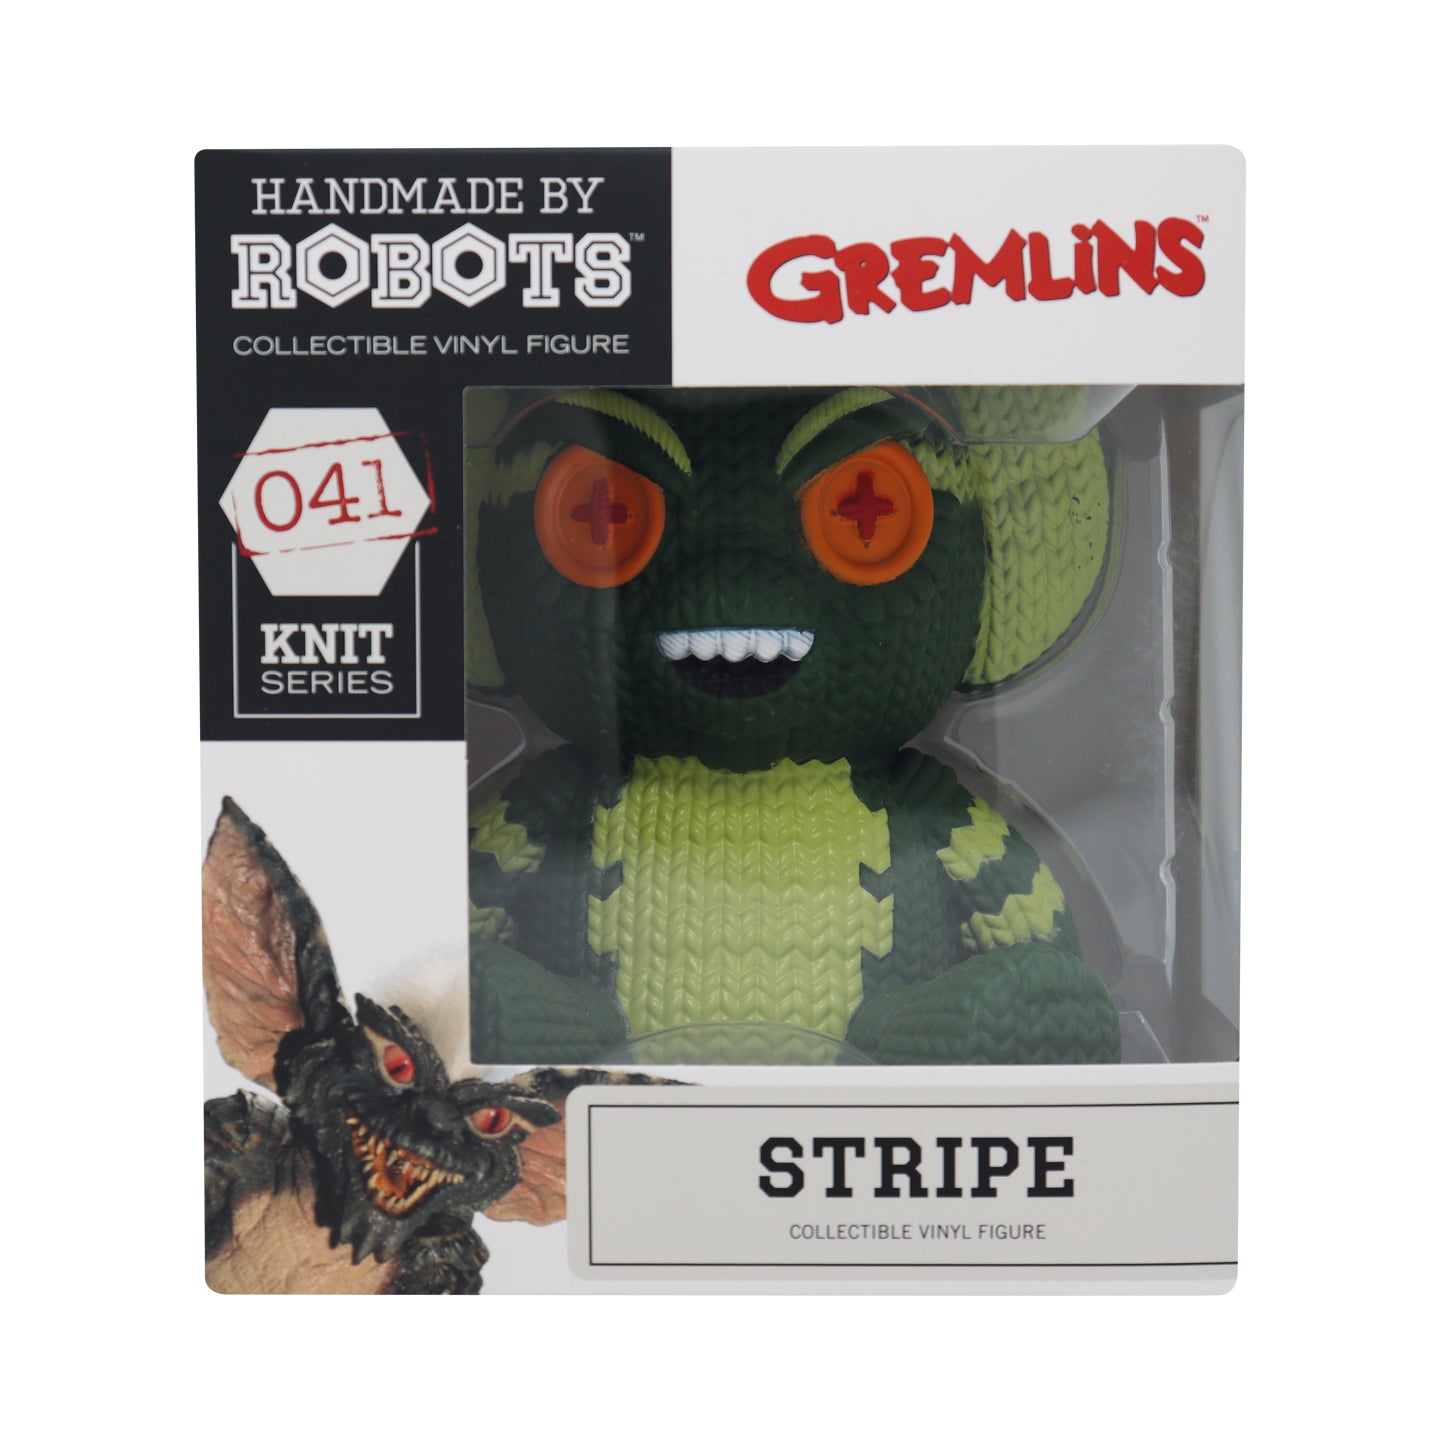 Gremlins - Stripe Collectible Vinyl Figure from Handmade By Robots